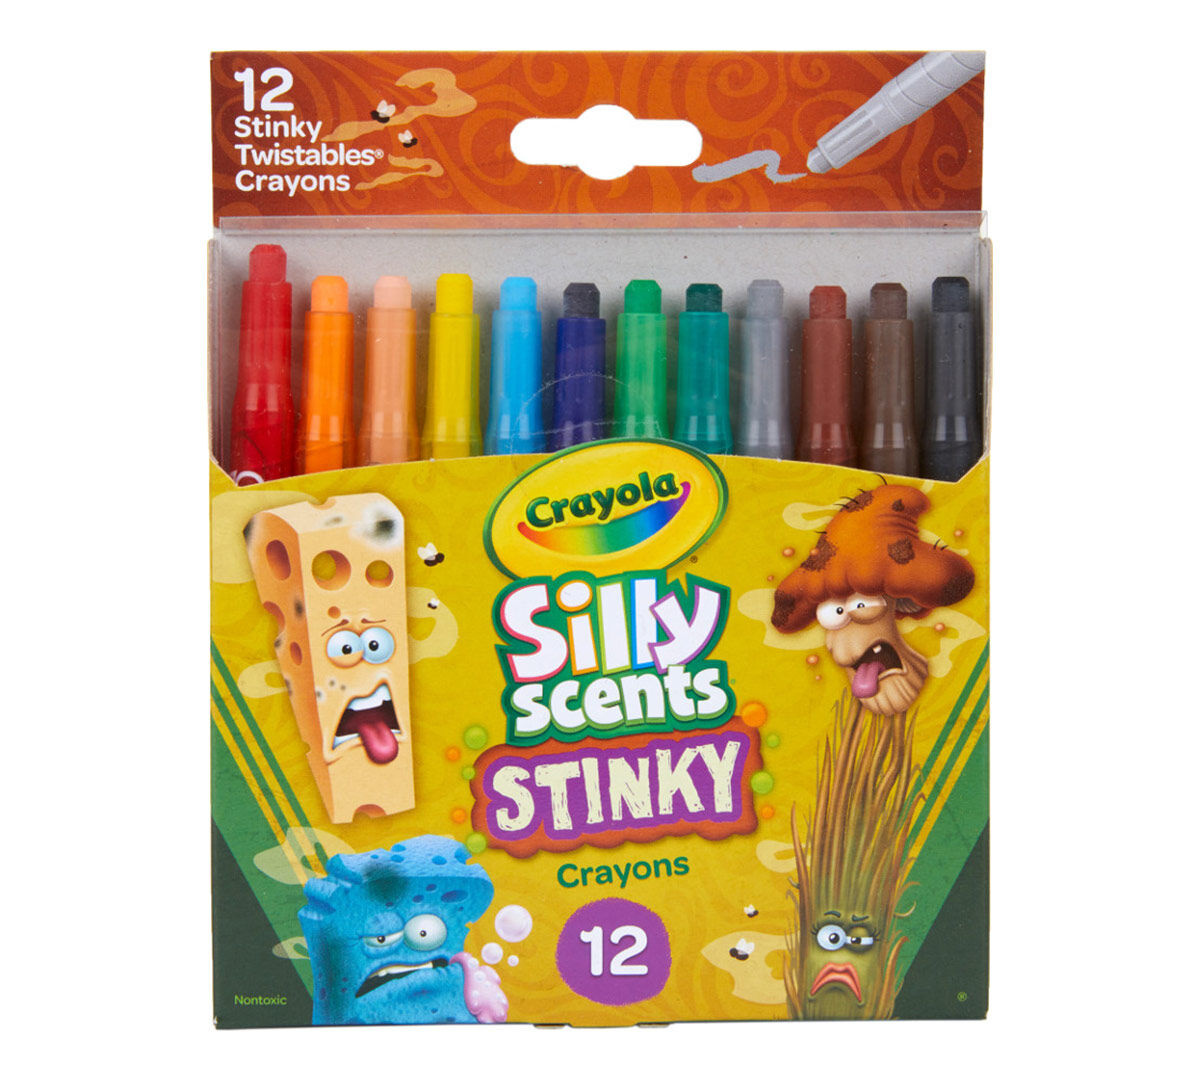 Silly Scents Mini Twistables Crayons, Stinky, 12 Count